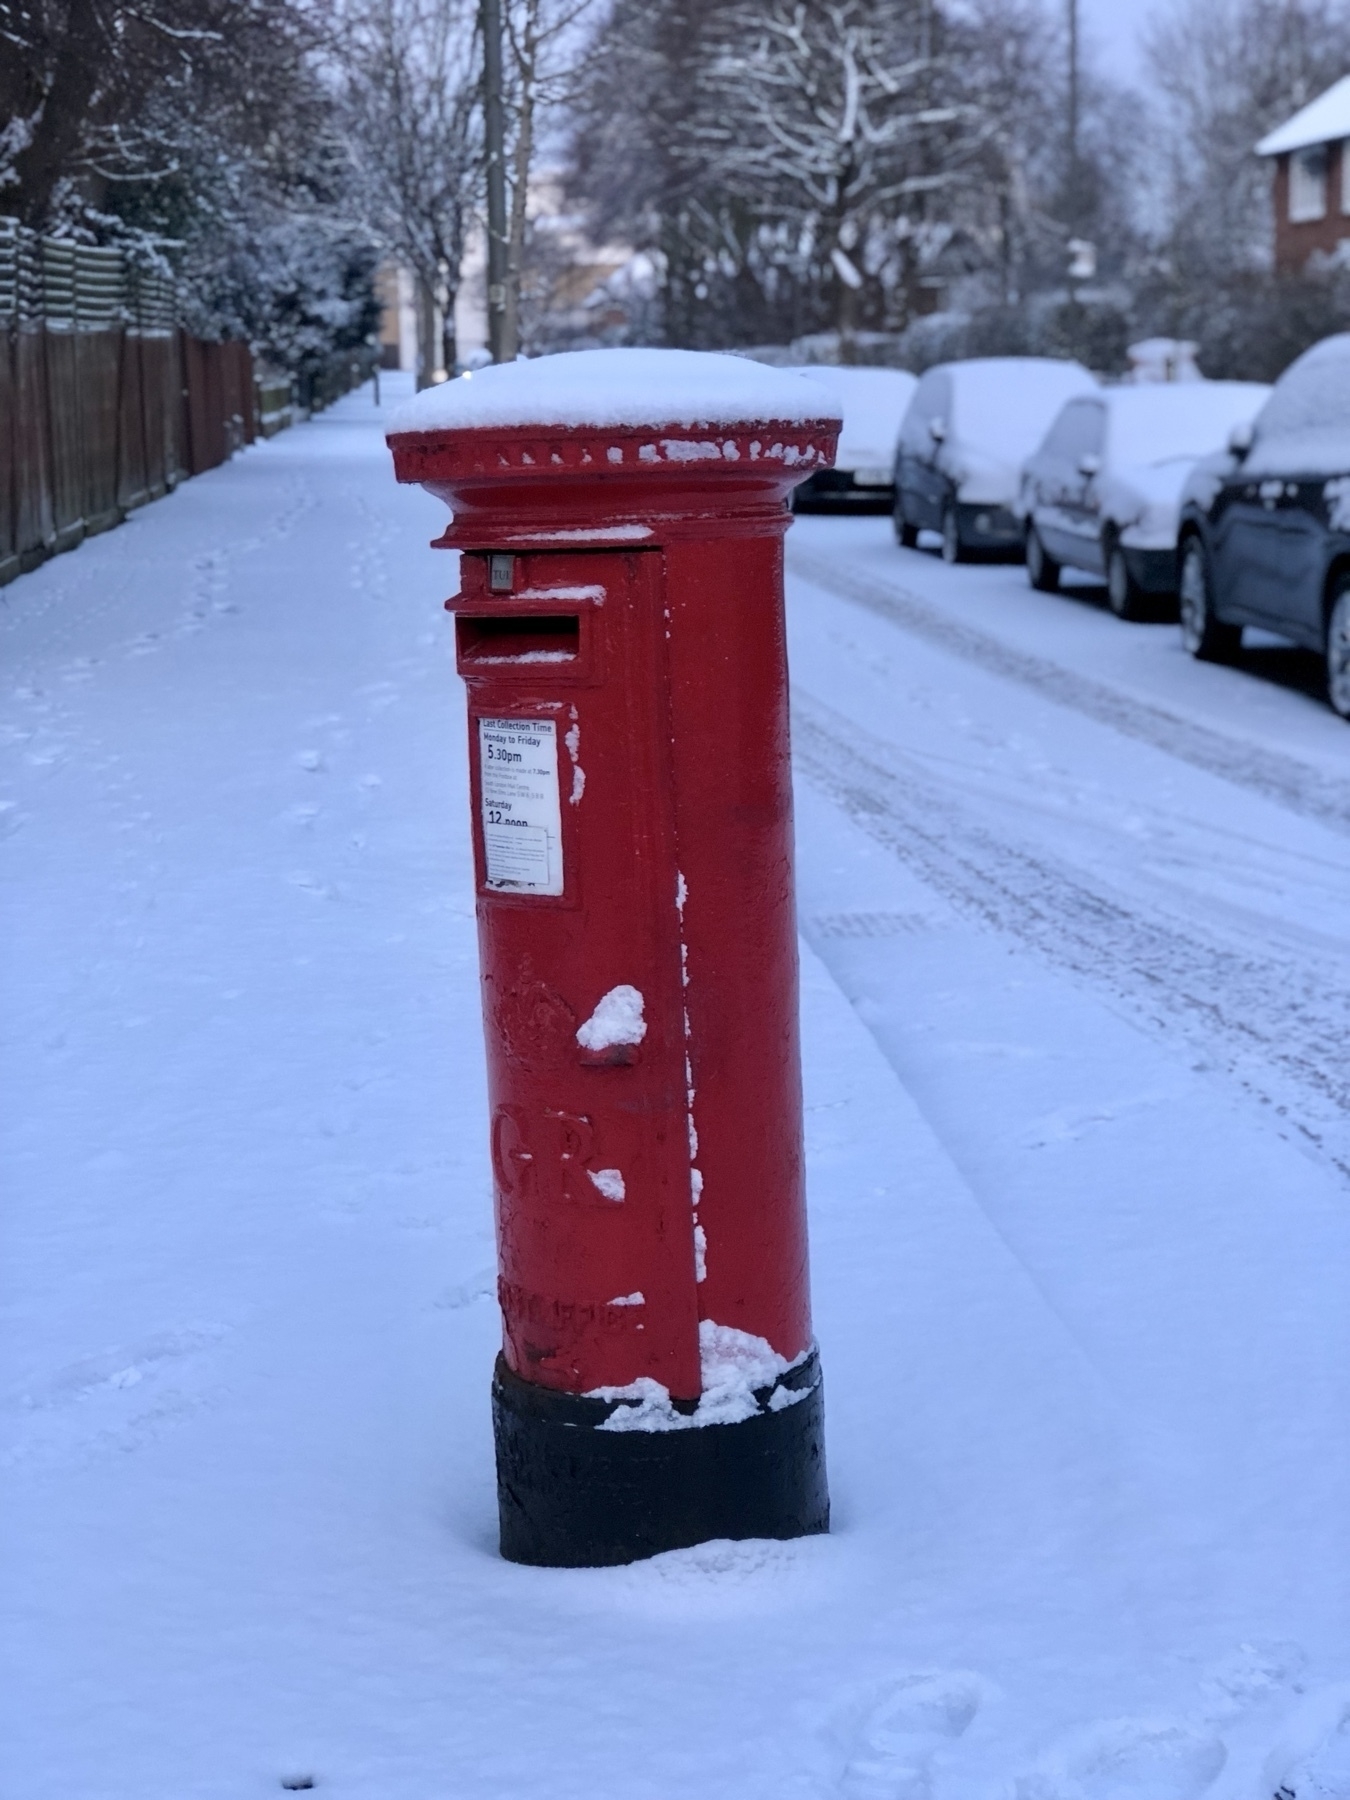 a royal mail postbox wearing a snow cap kn a snowy street